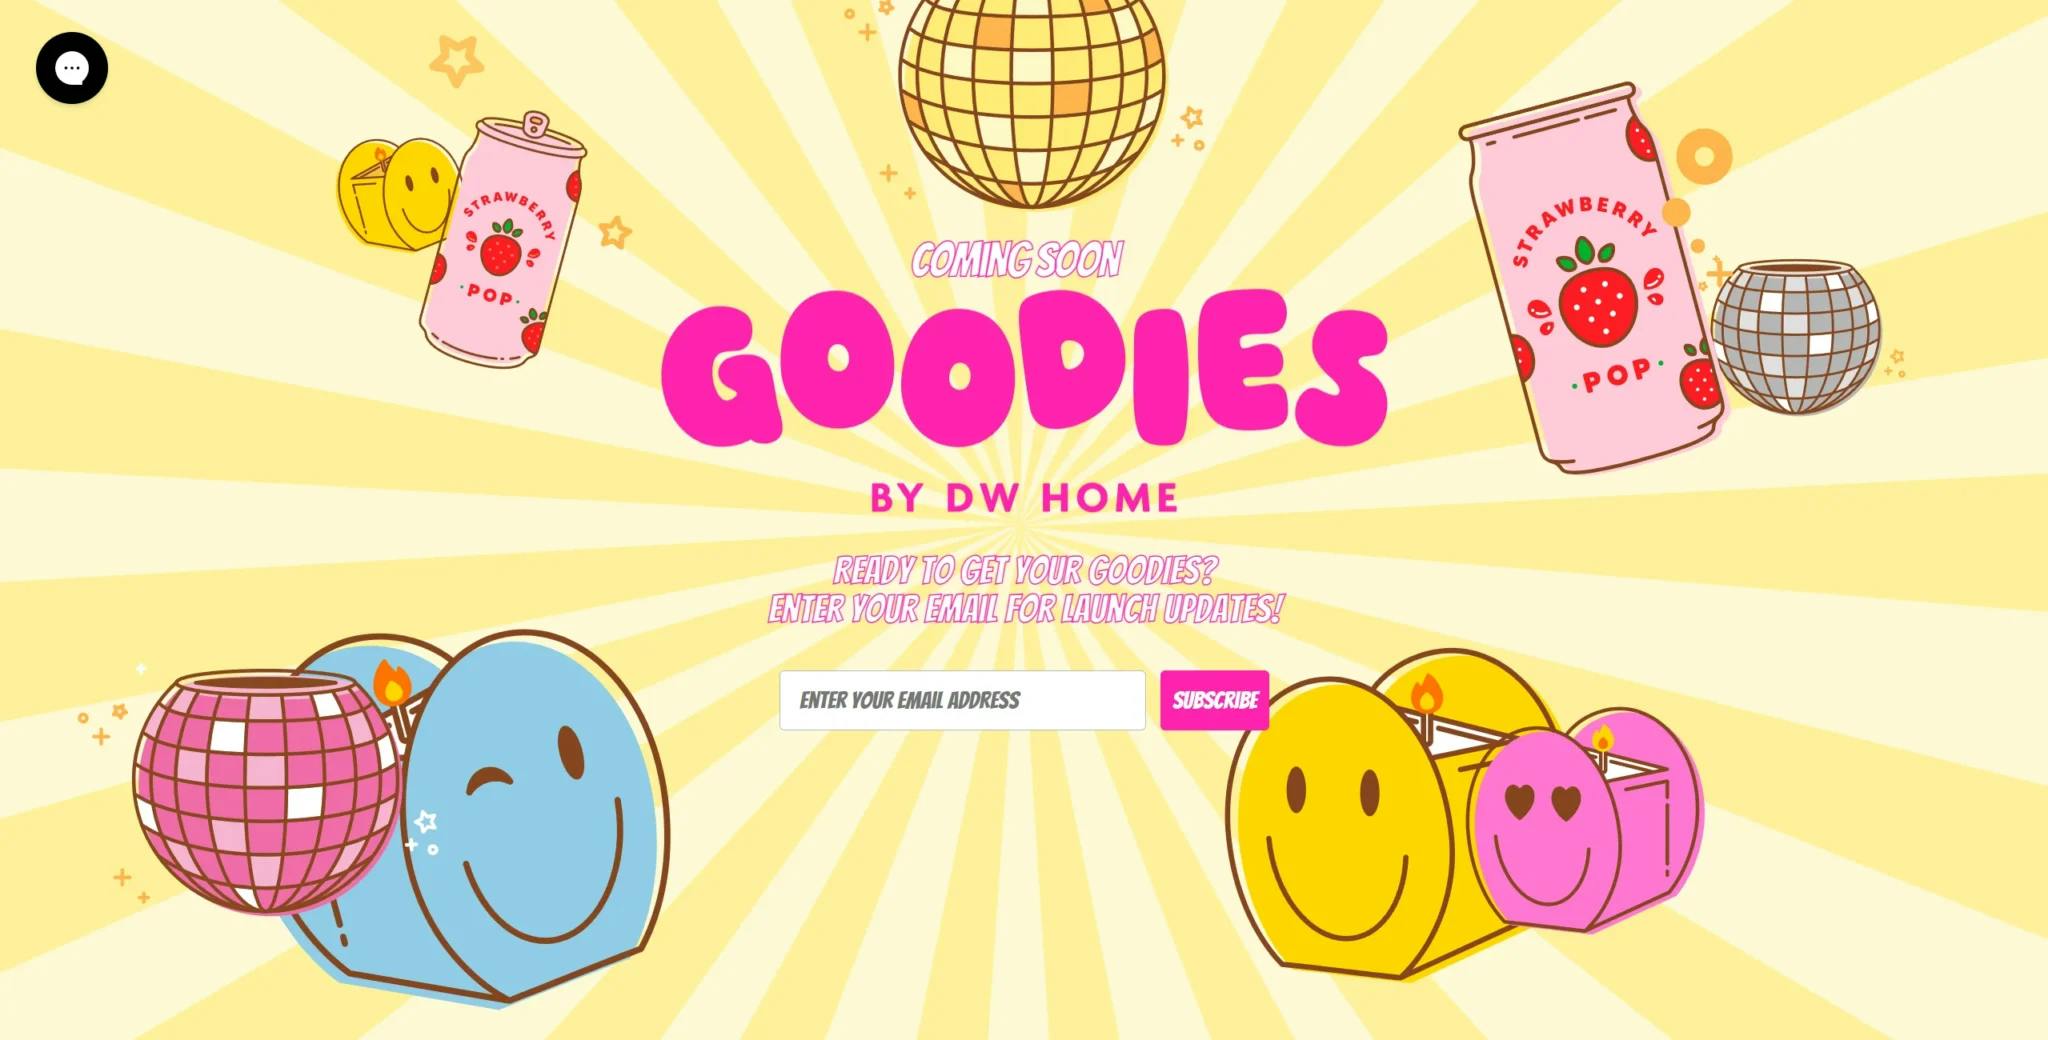 DW Home Goodies landing page